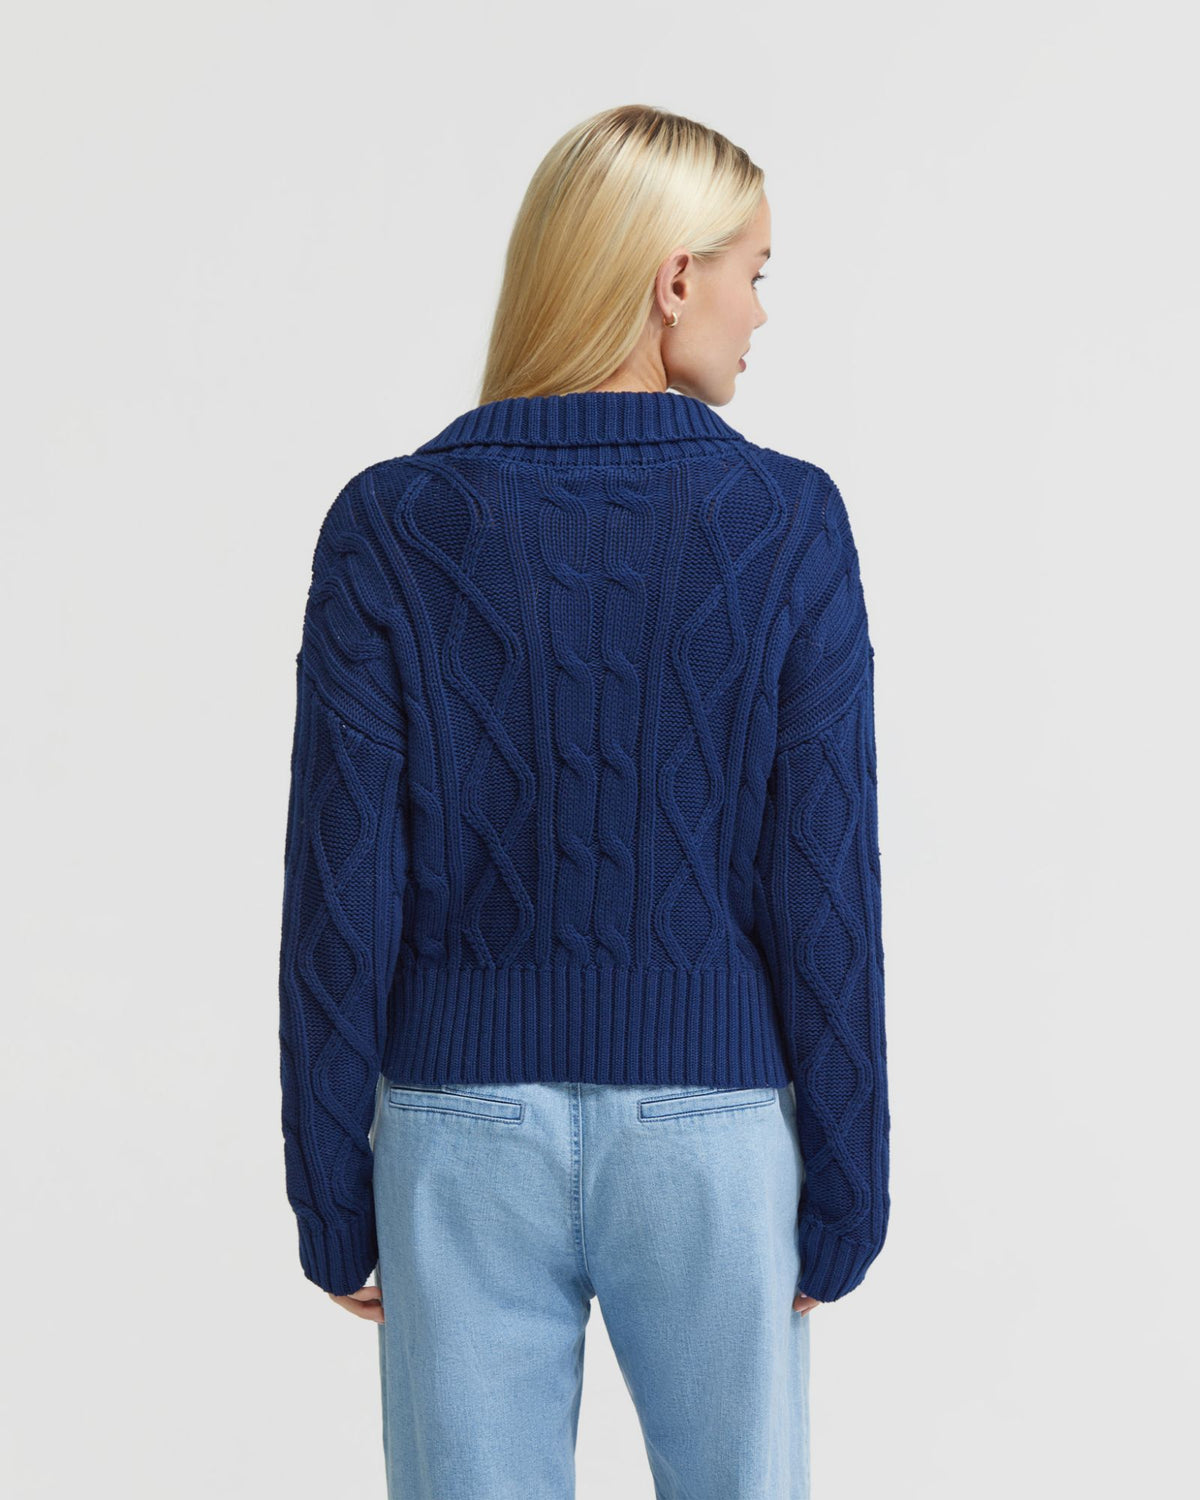 IVY CABLE KNIT TOP - AVAILABLE ~ 1-2 weeks WOMENS KNITWEAR